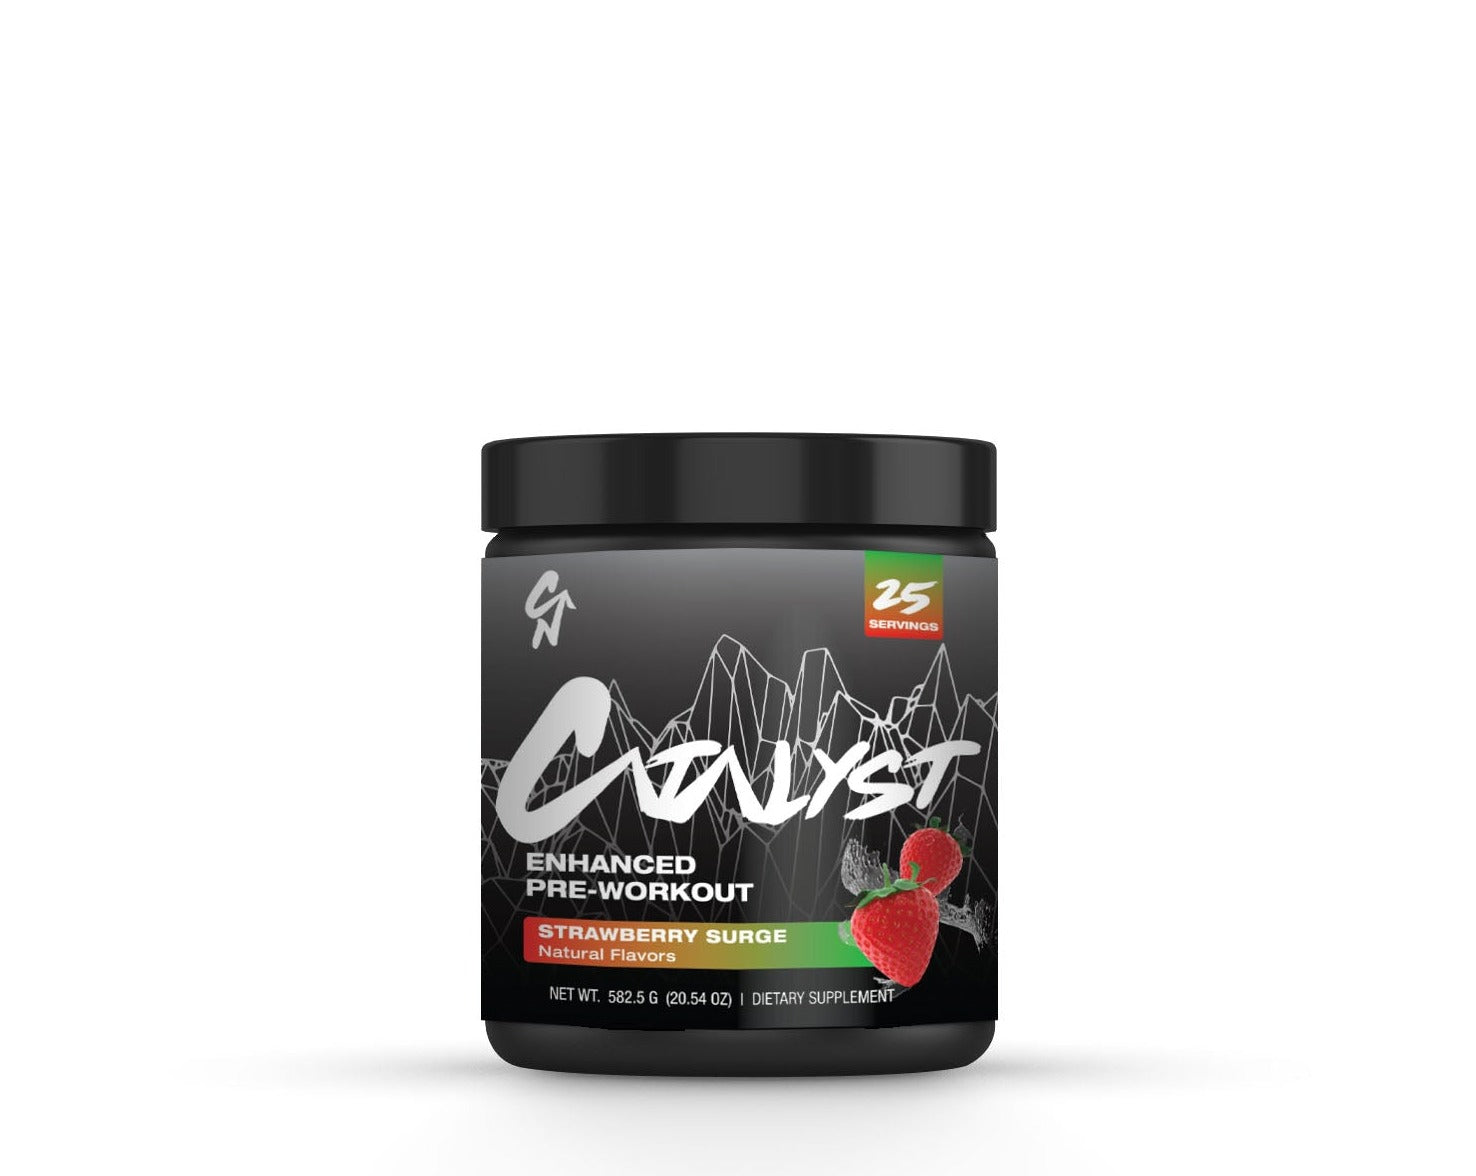 Catalyst Pre-Workout